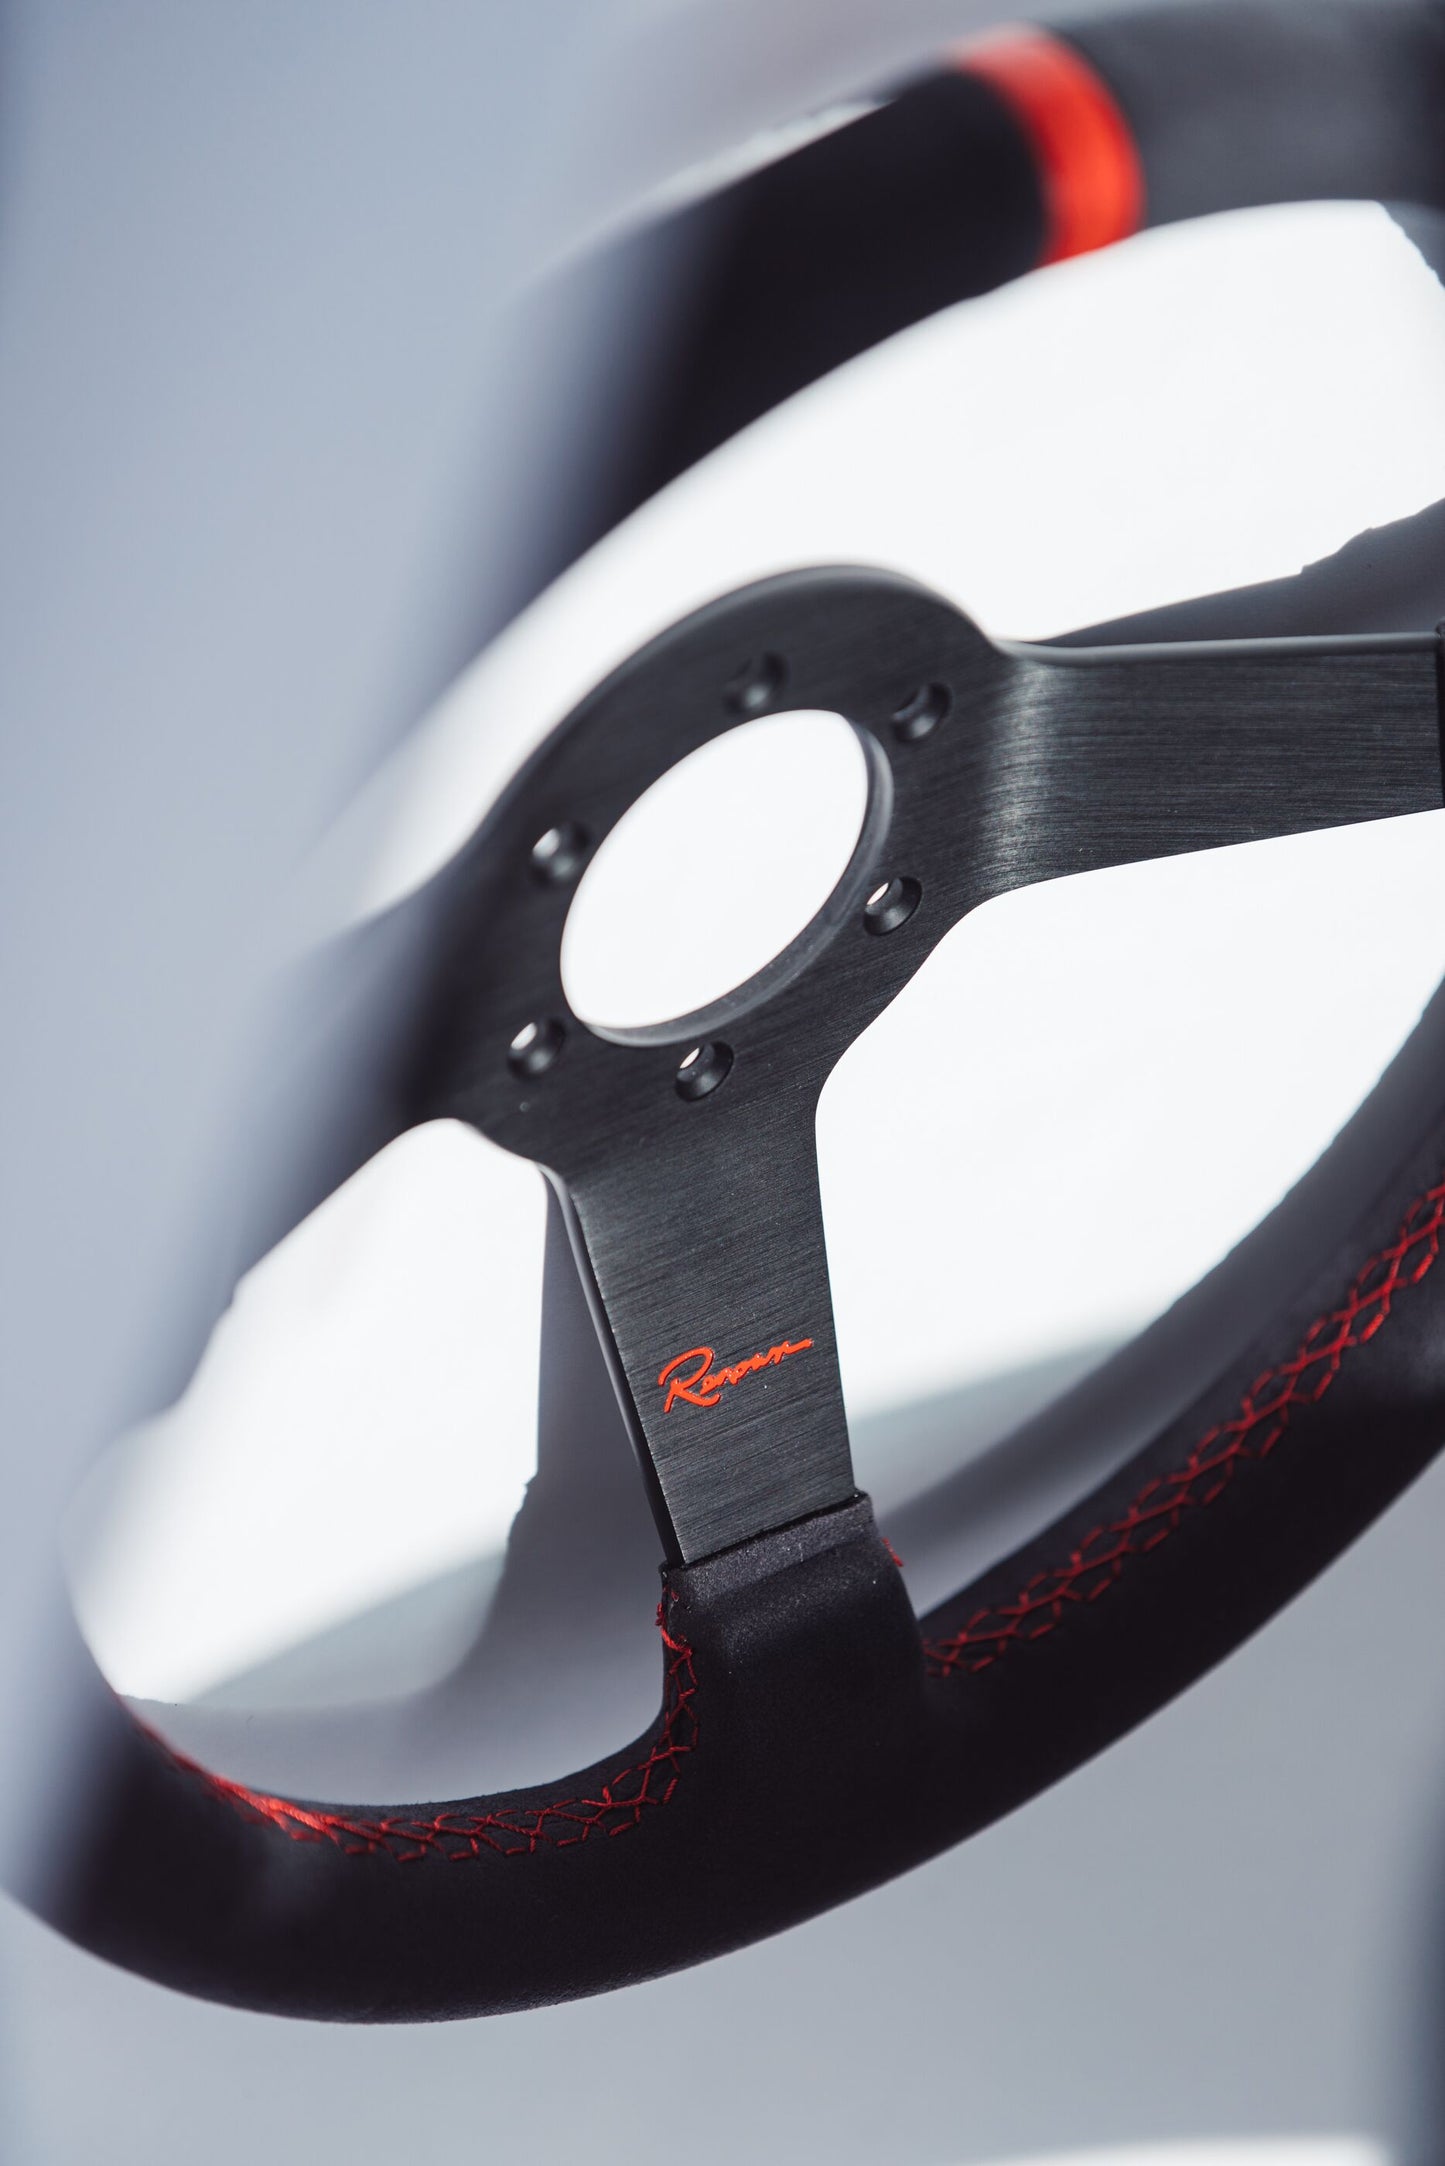 Renown Time Trial Rosso Competition Steering Wheel